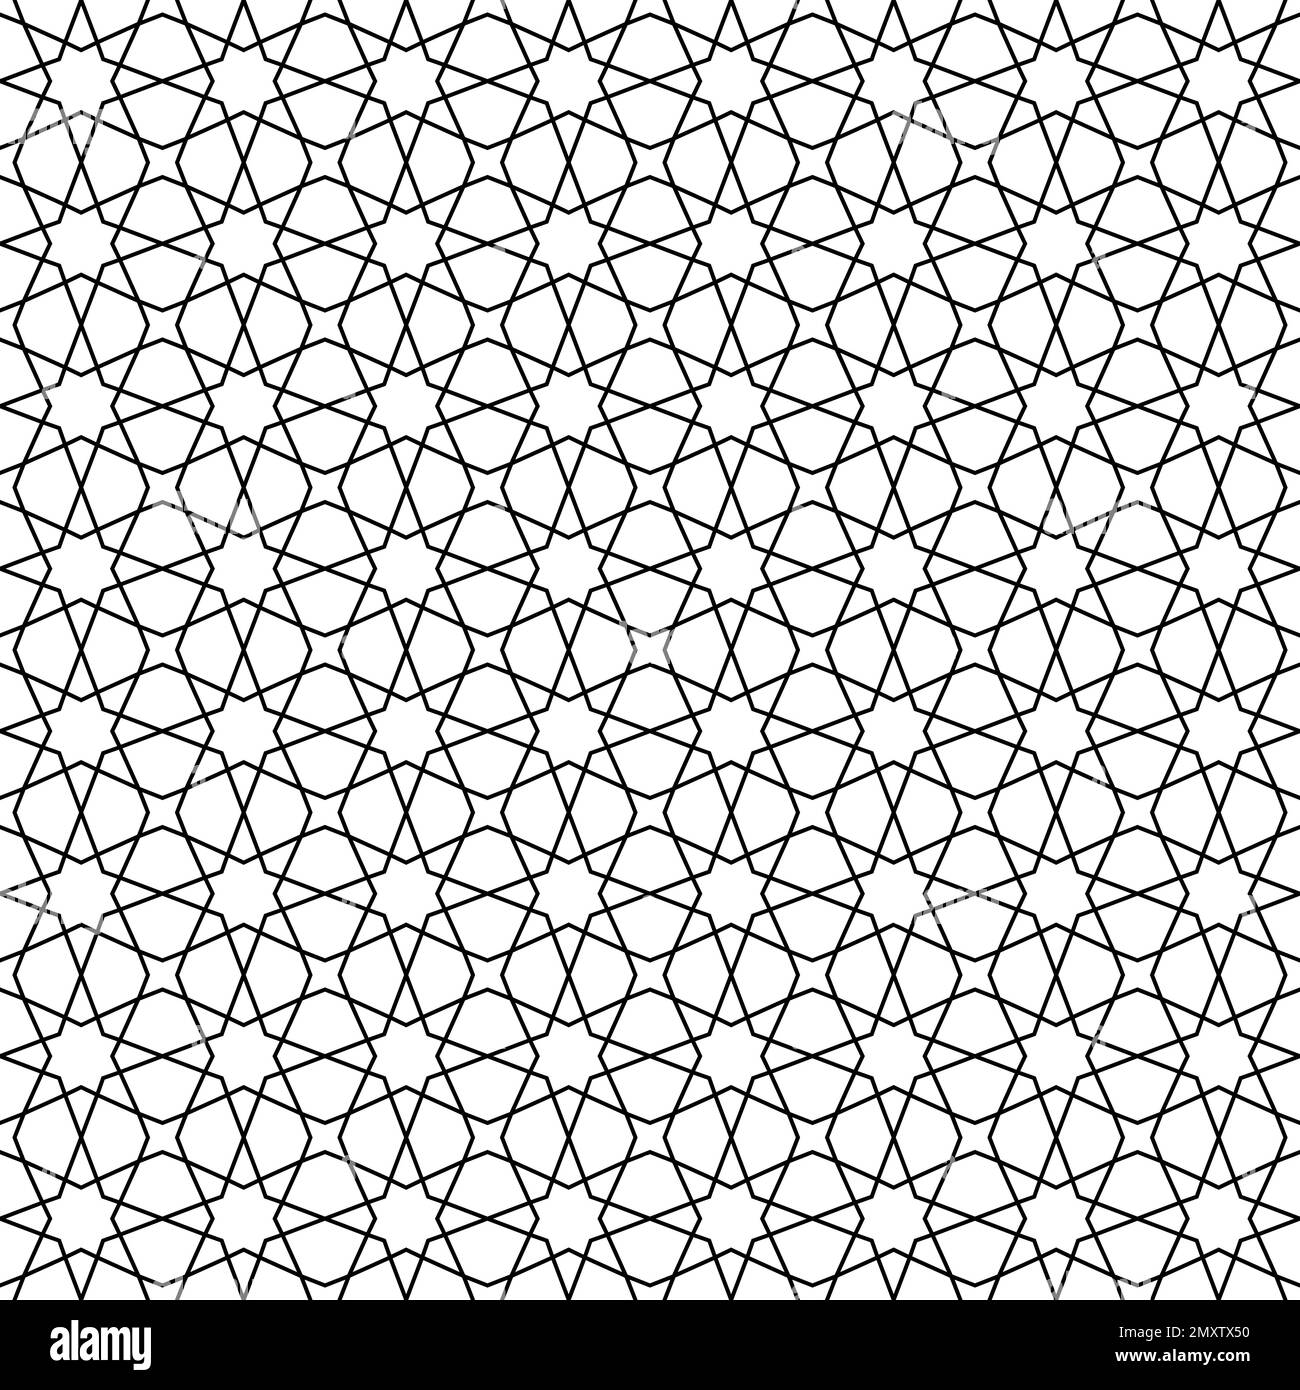 Islamic Floral Moon and Star Wrapping Paper